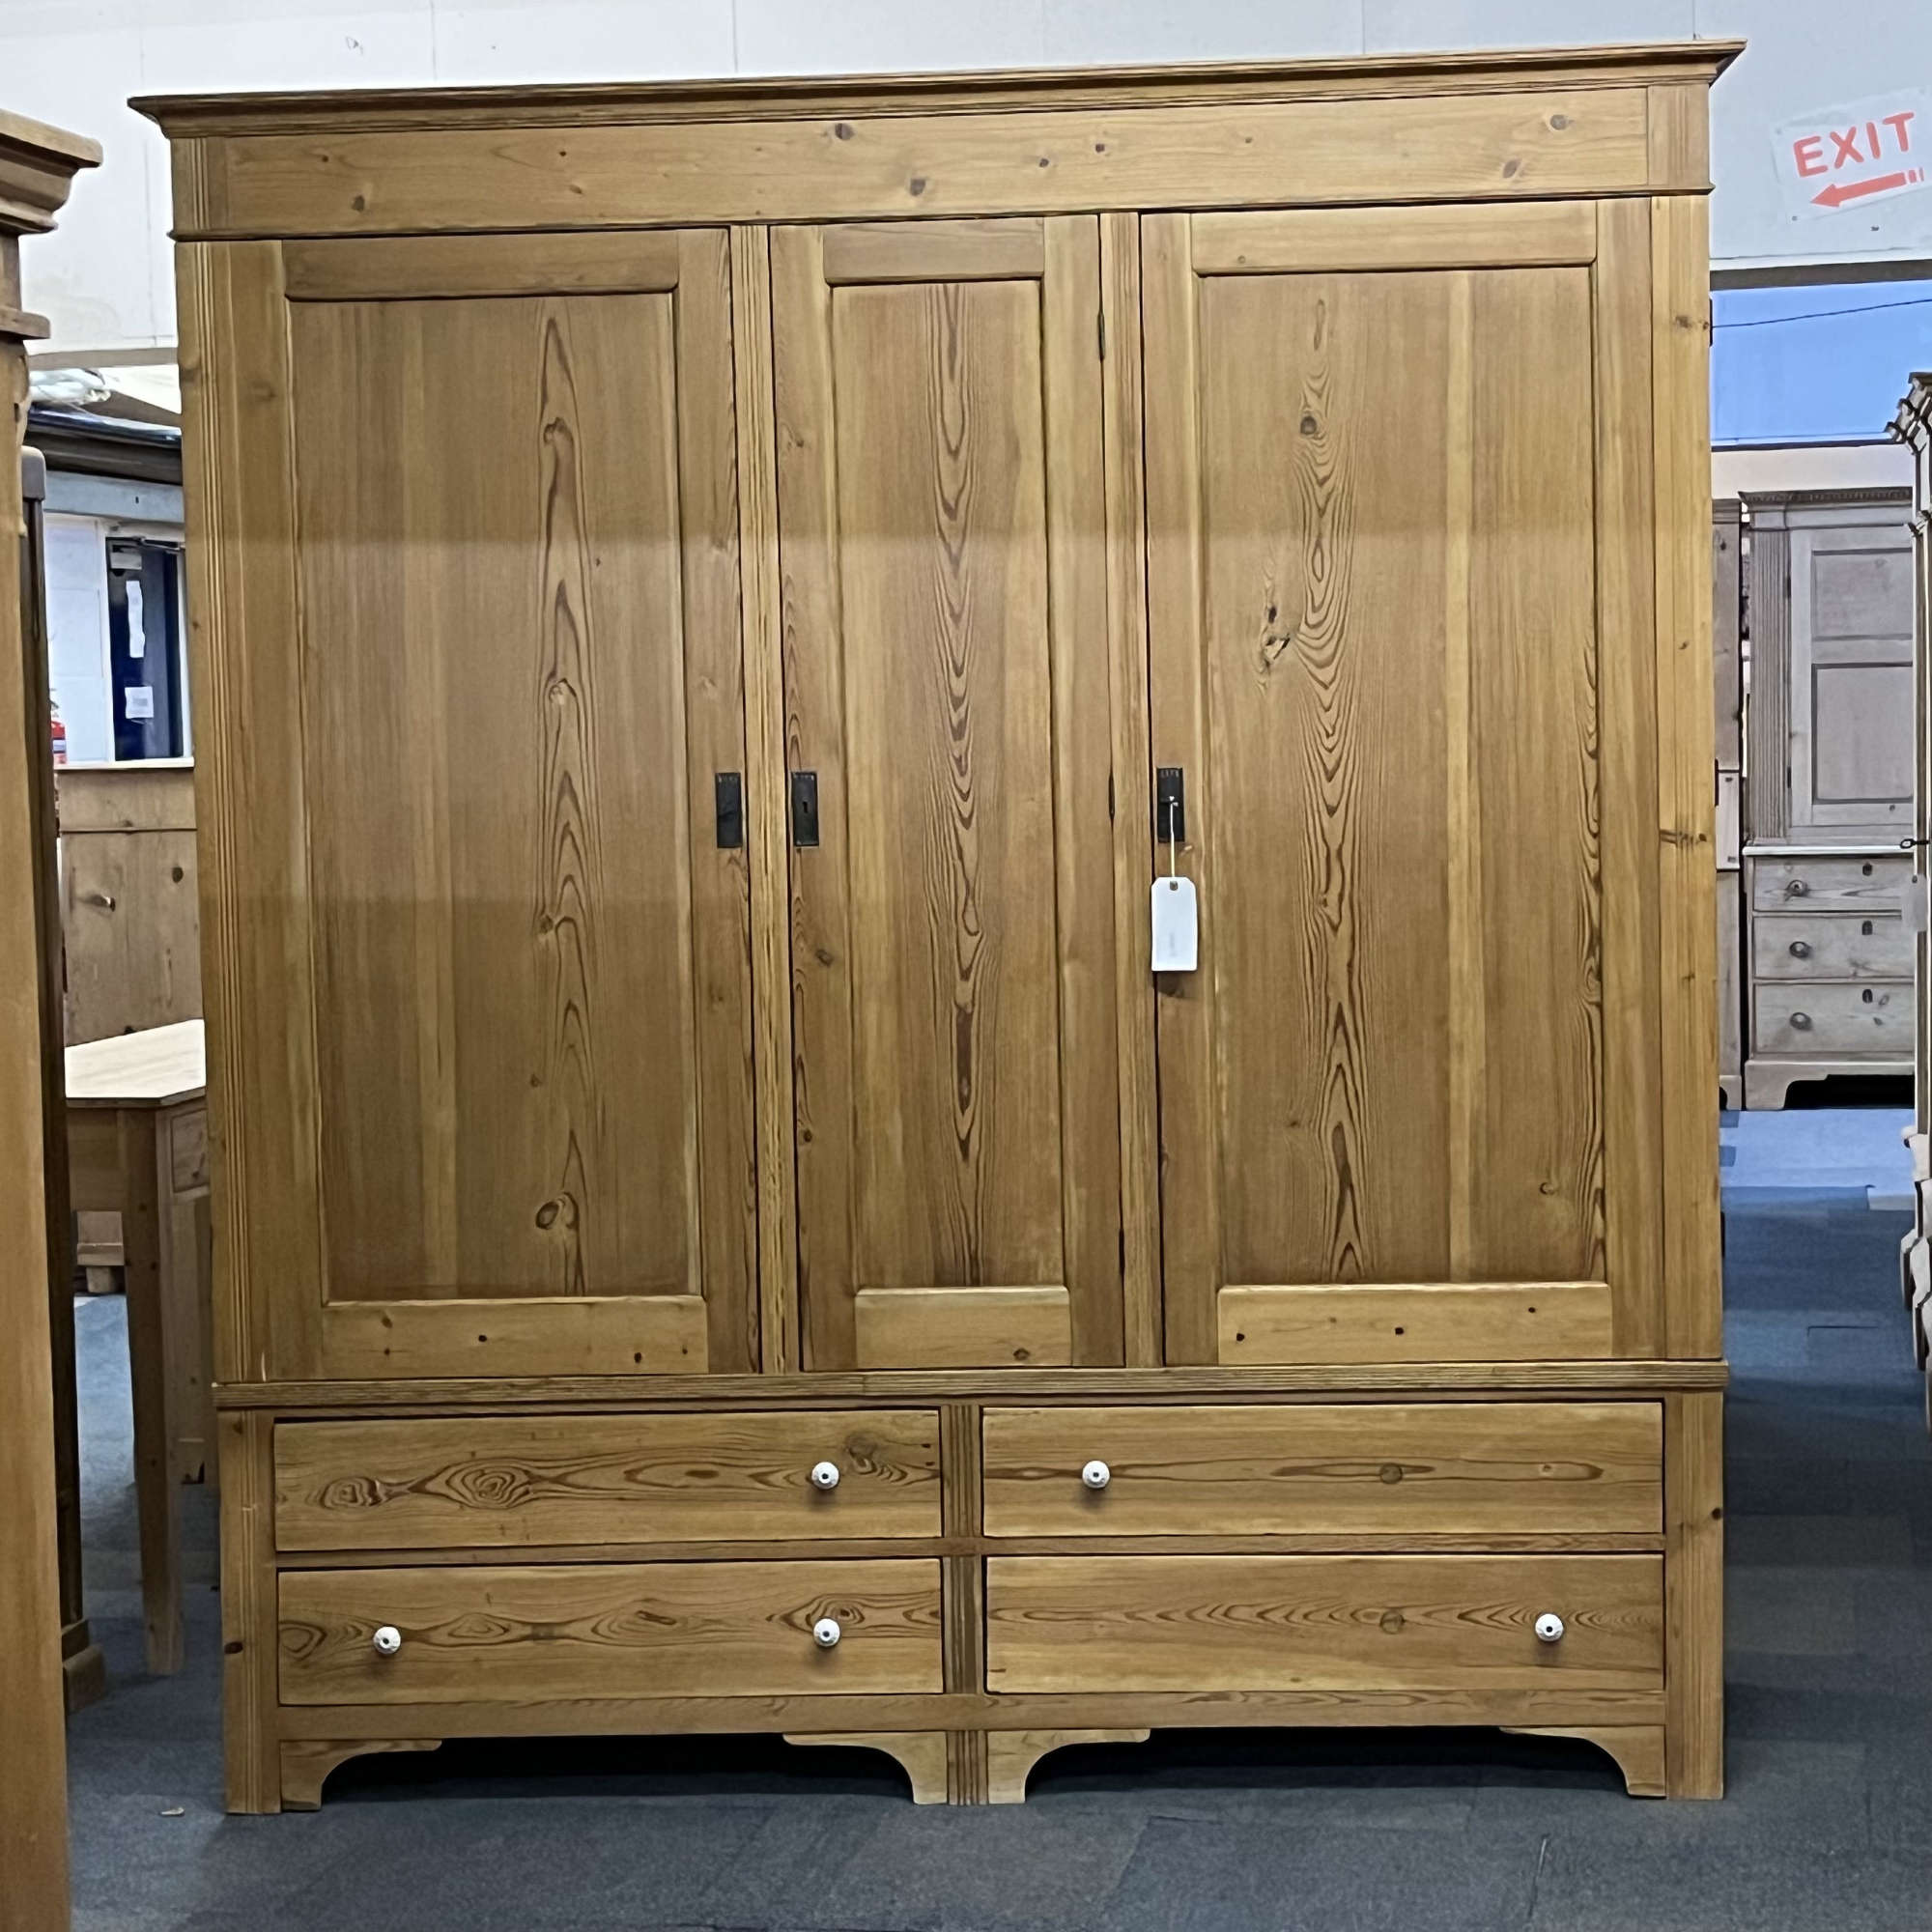 Xtremely Large East German Triple Antique Pine Wardrobe With 4 Drawers (dismantles)